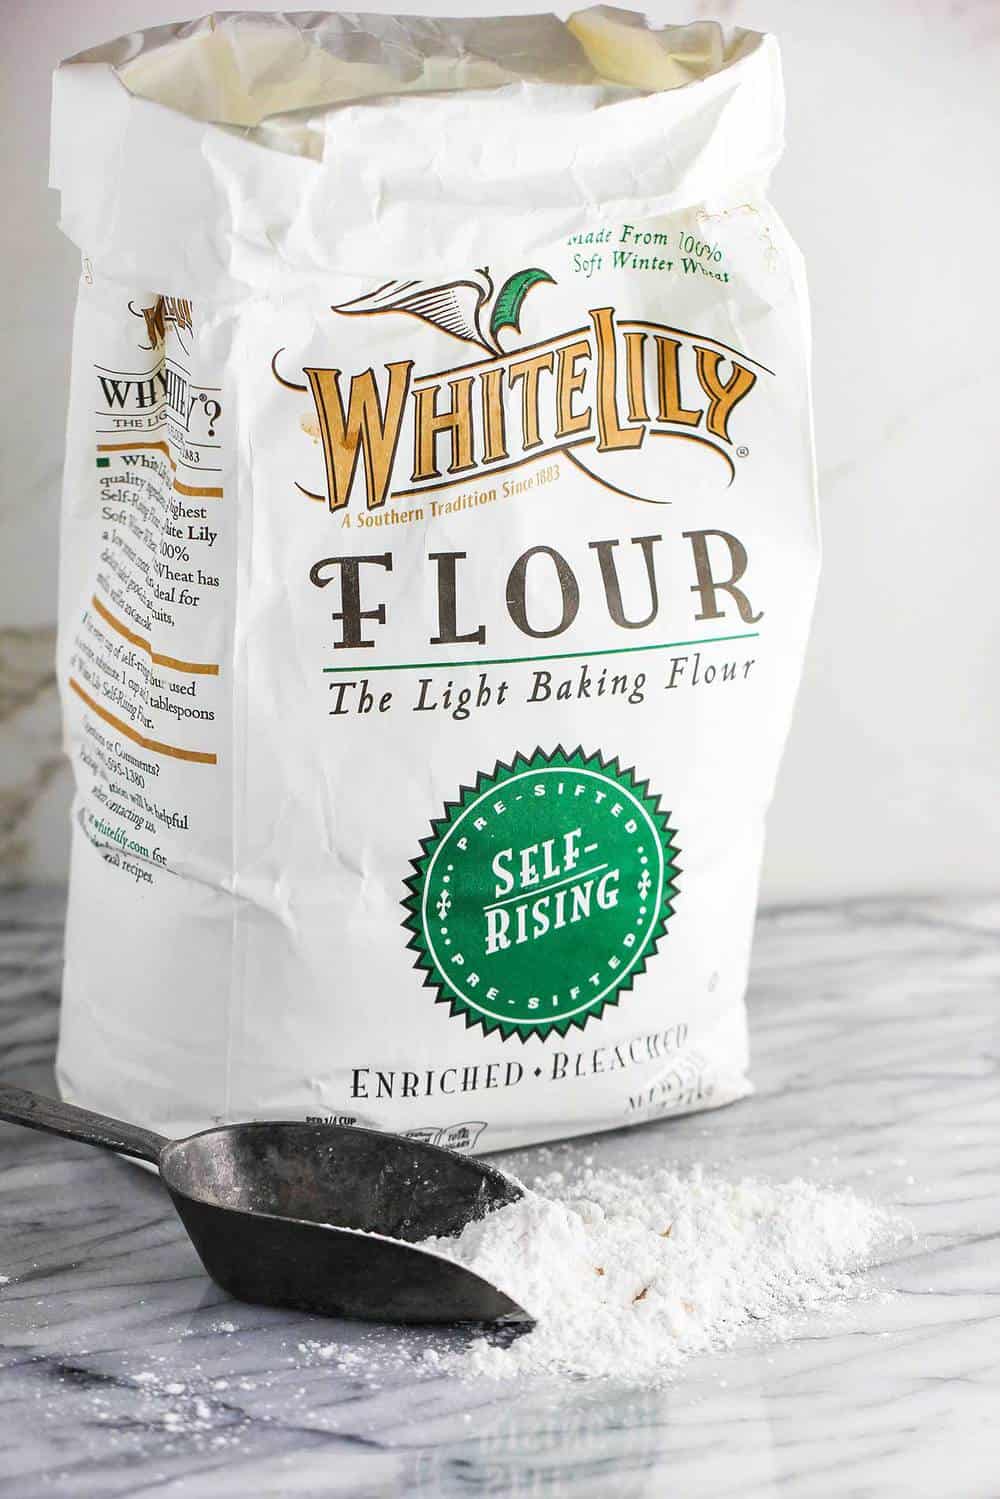 A bag of White Lily flour to use for Southern biscuits